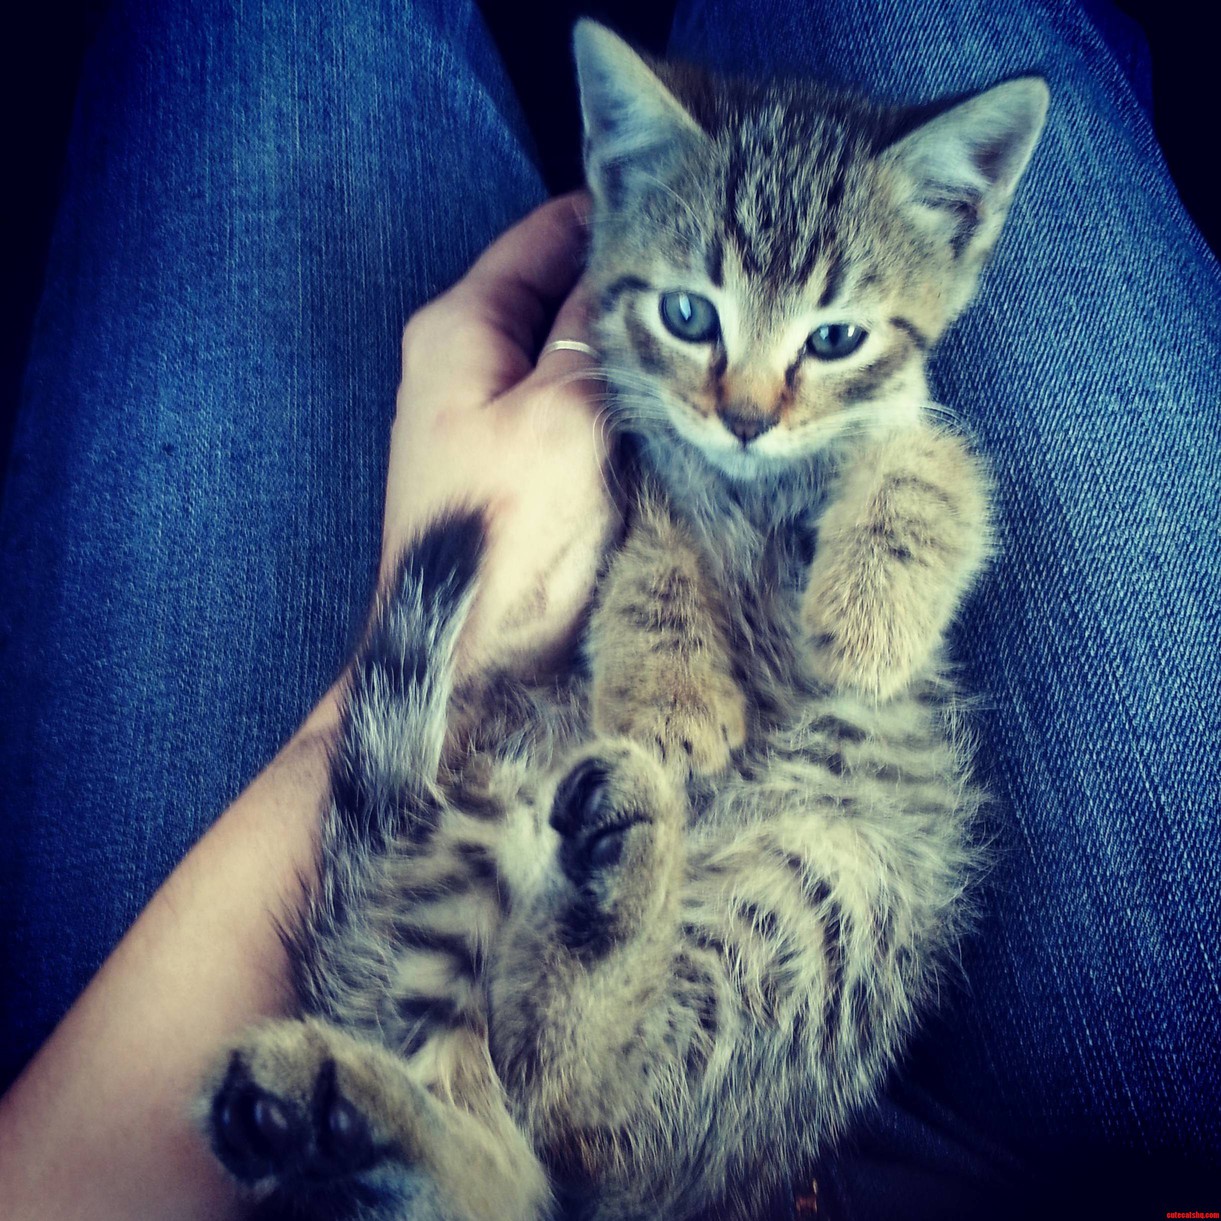 I Found This Baby Kitteh In Someones Tire At The Mall Today.